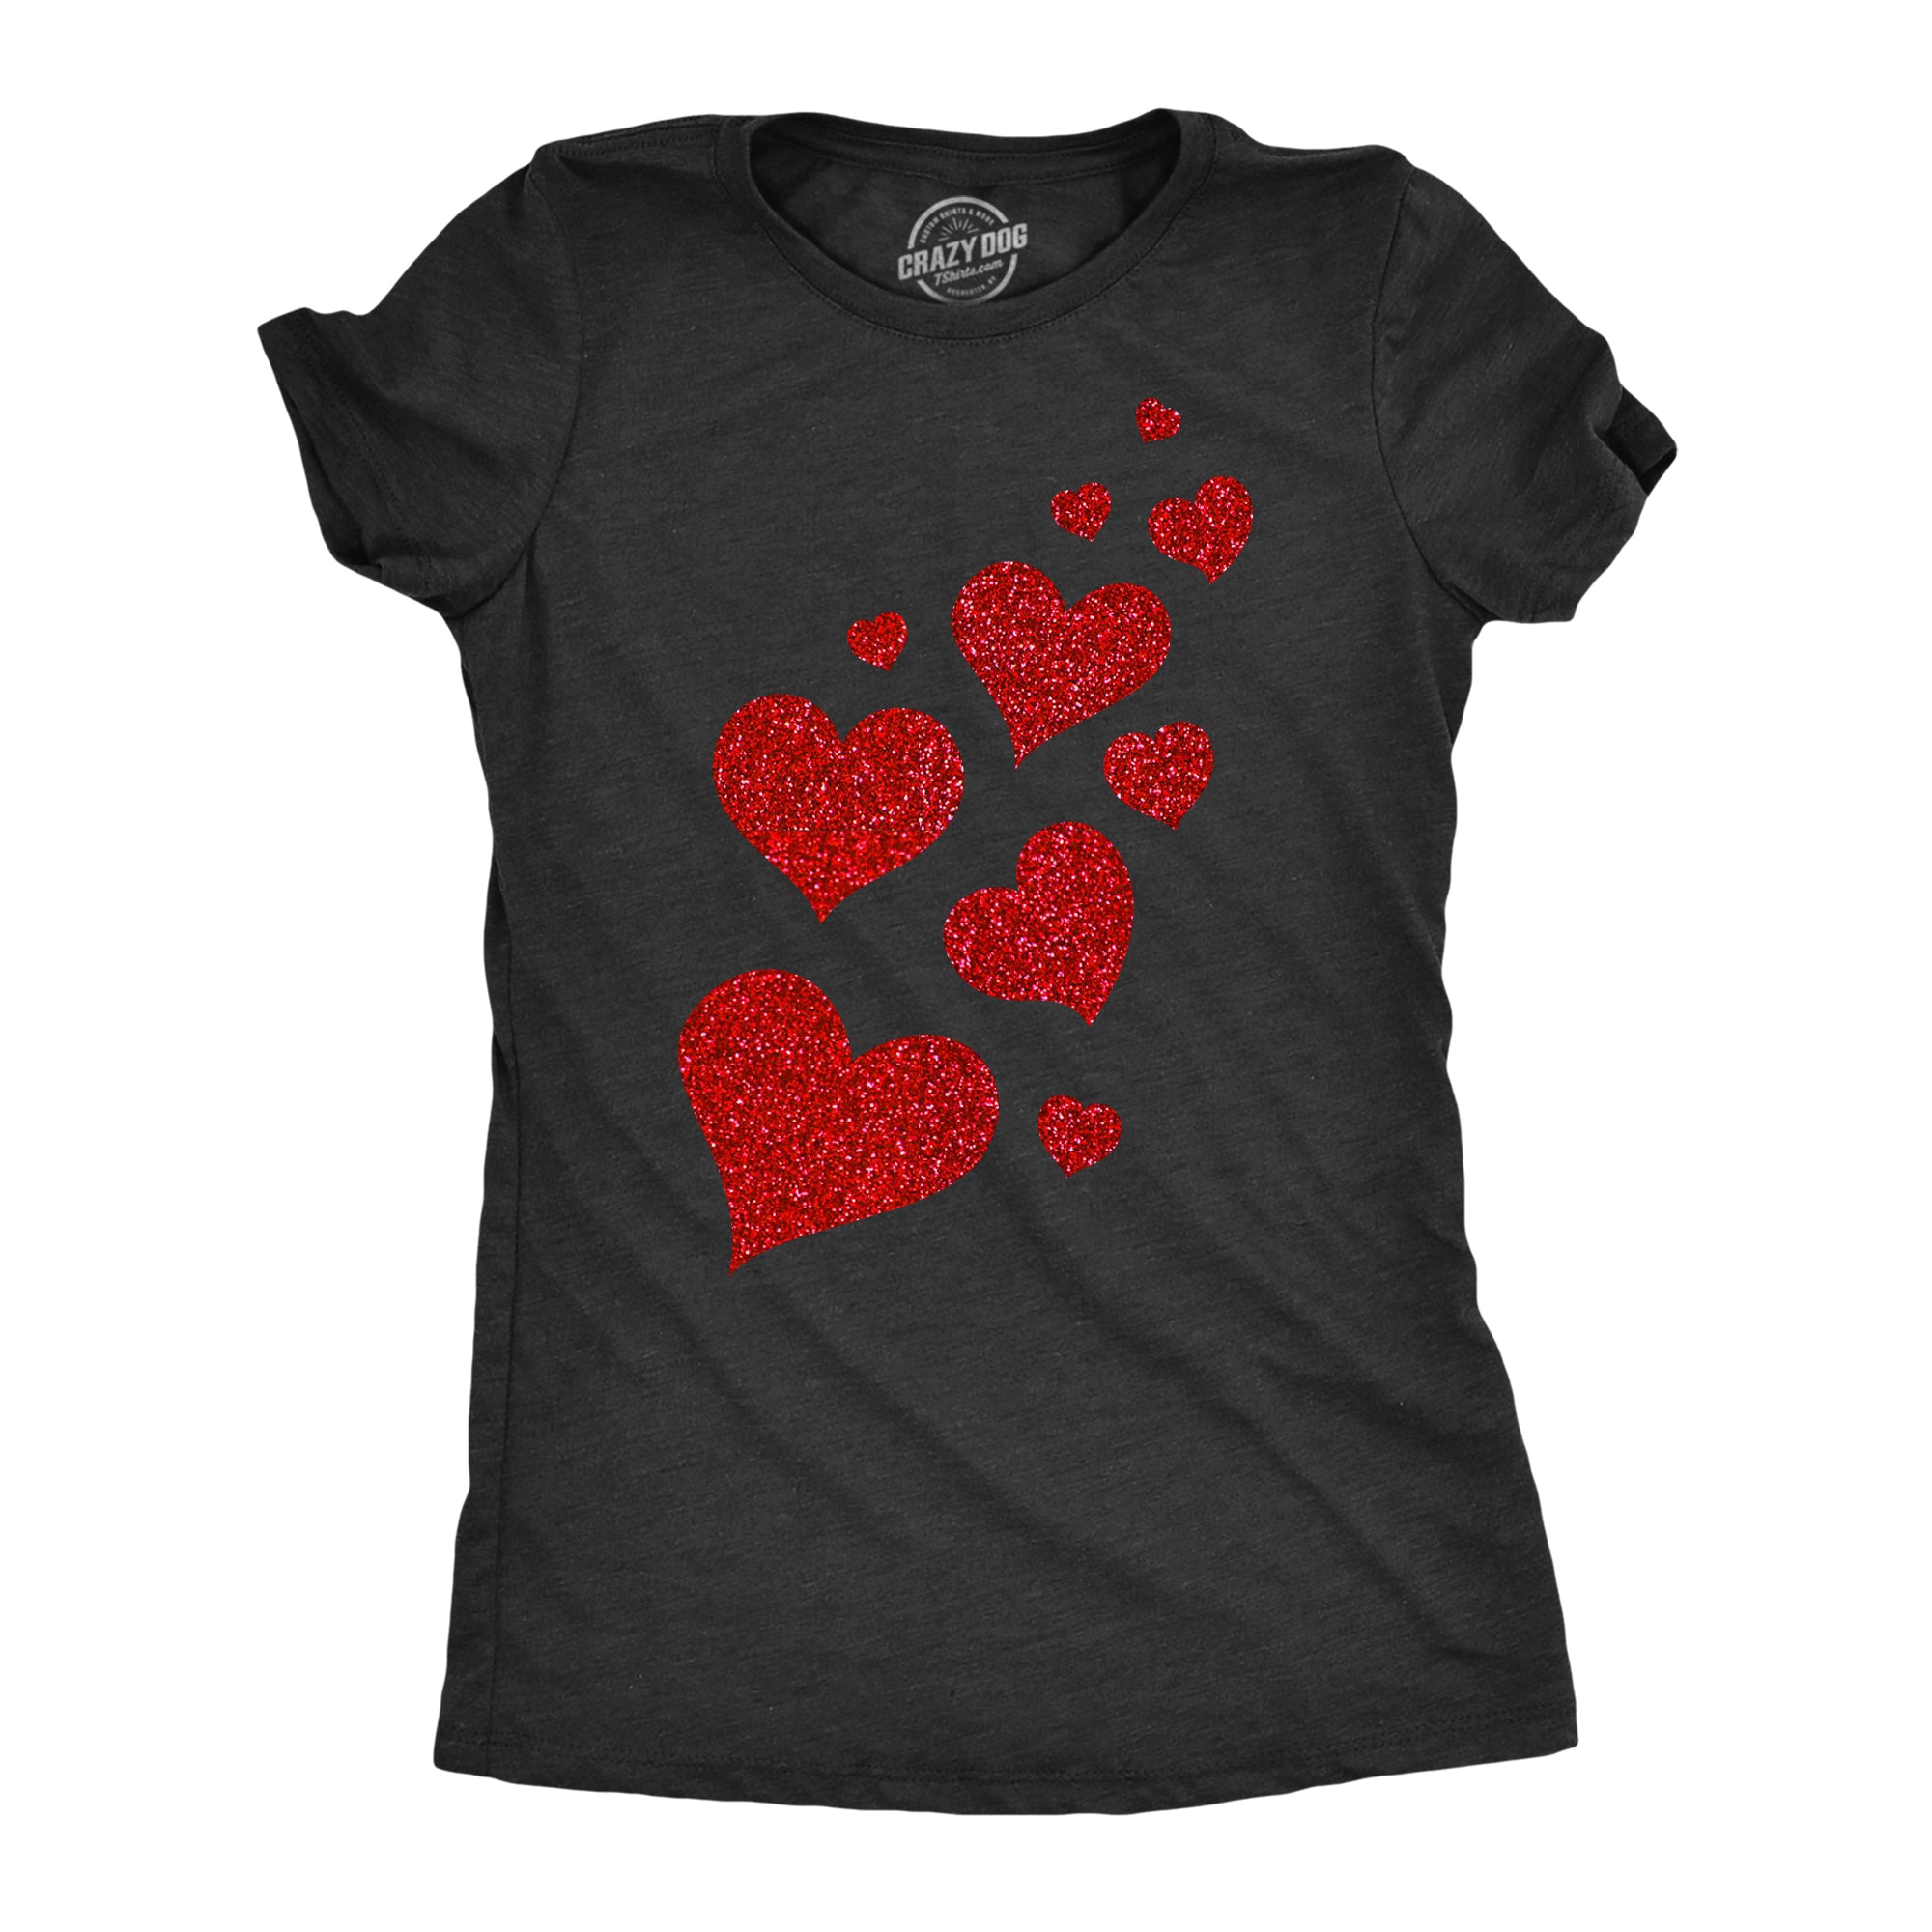 Funny Heather Black - Glitter Hearts Glitter Hearts Womens T Shirt Nerdy Valentine's Day Mother's Day Tee